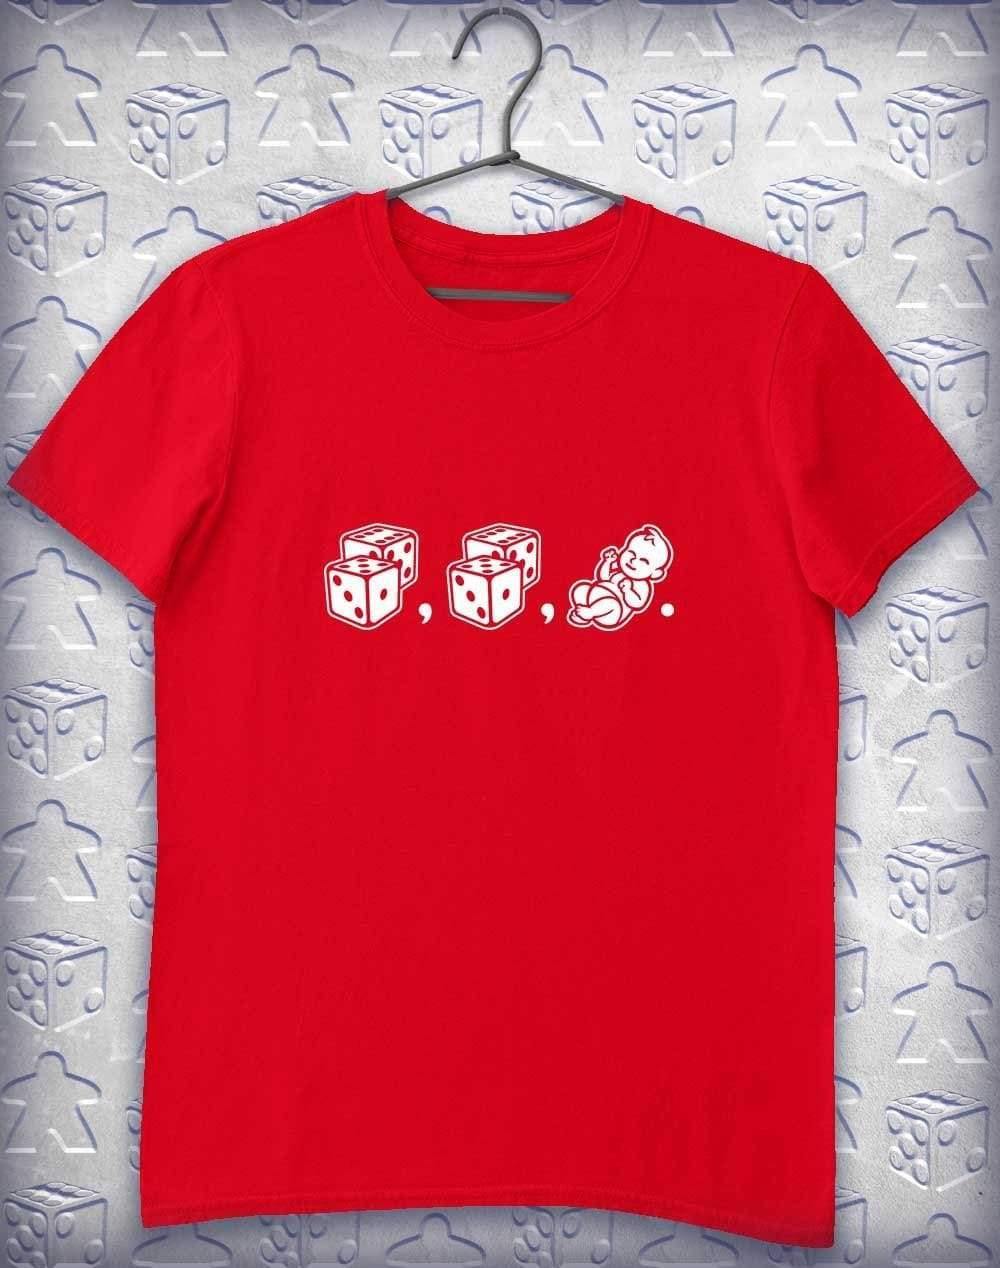 Dice Dice Baby (Plural) Alphagamer T-Shirt S / Red  - Off World Tees